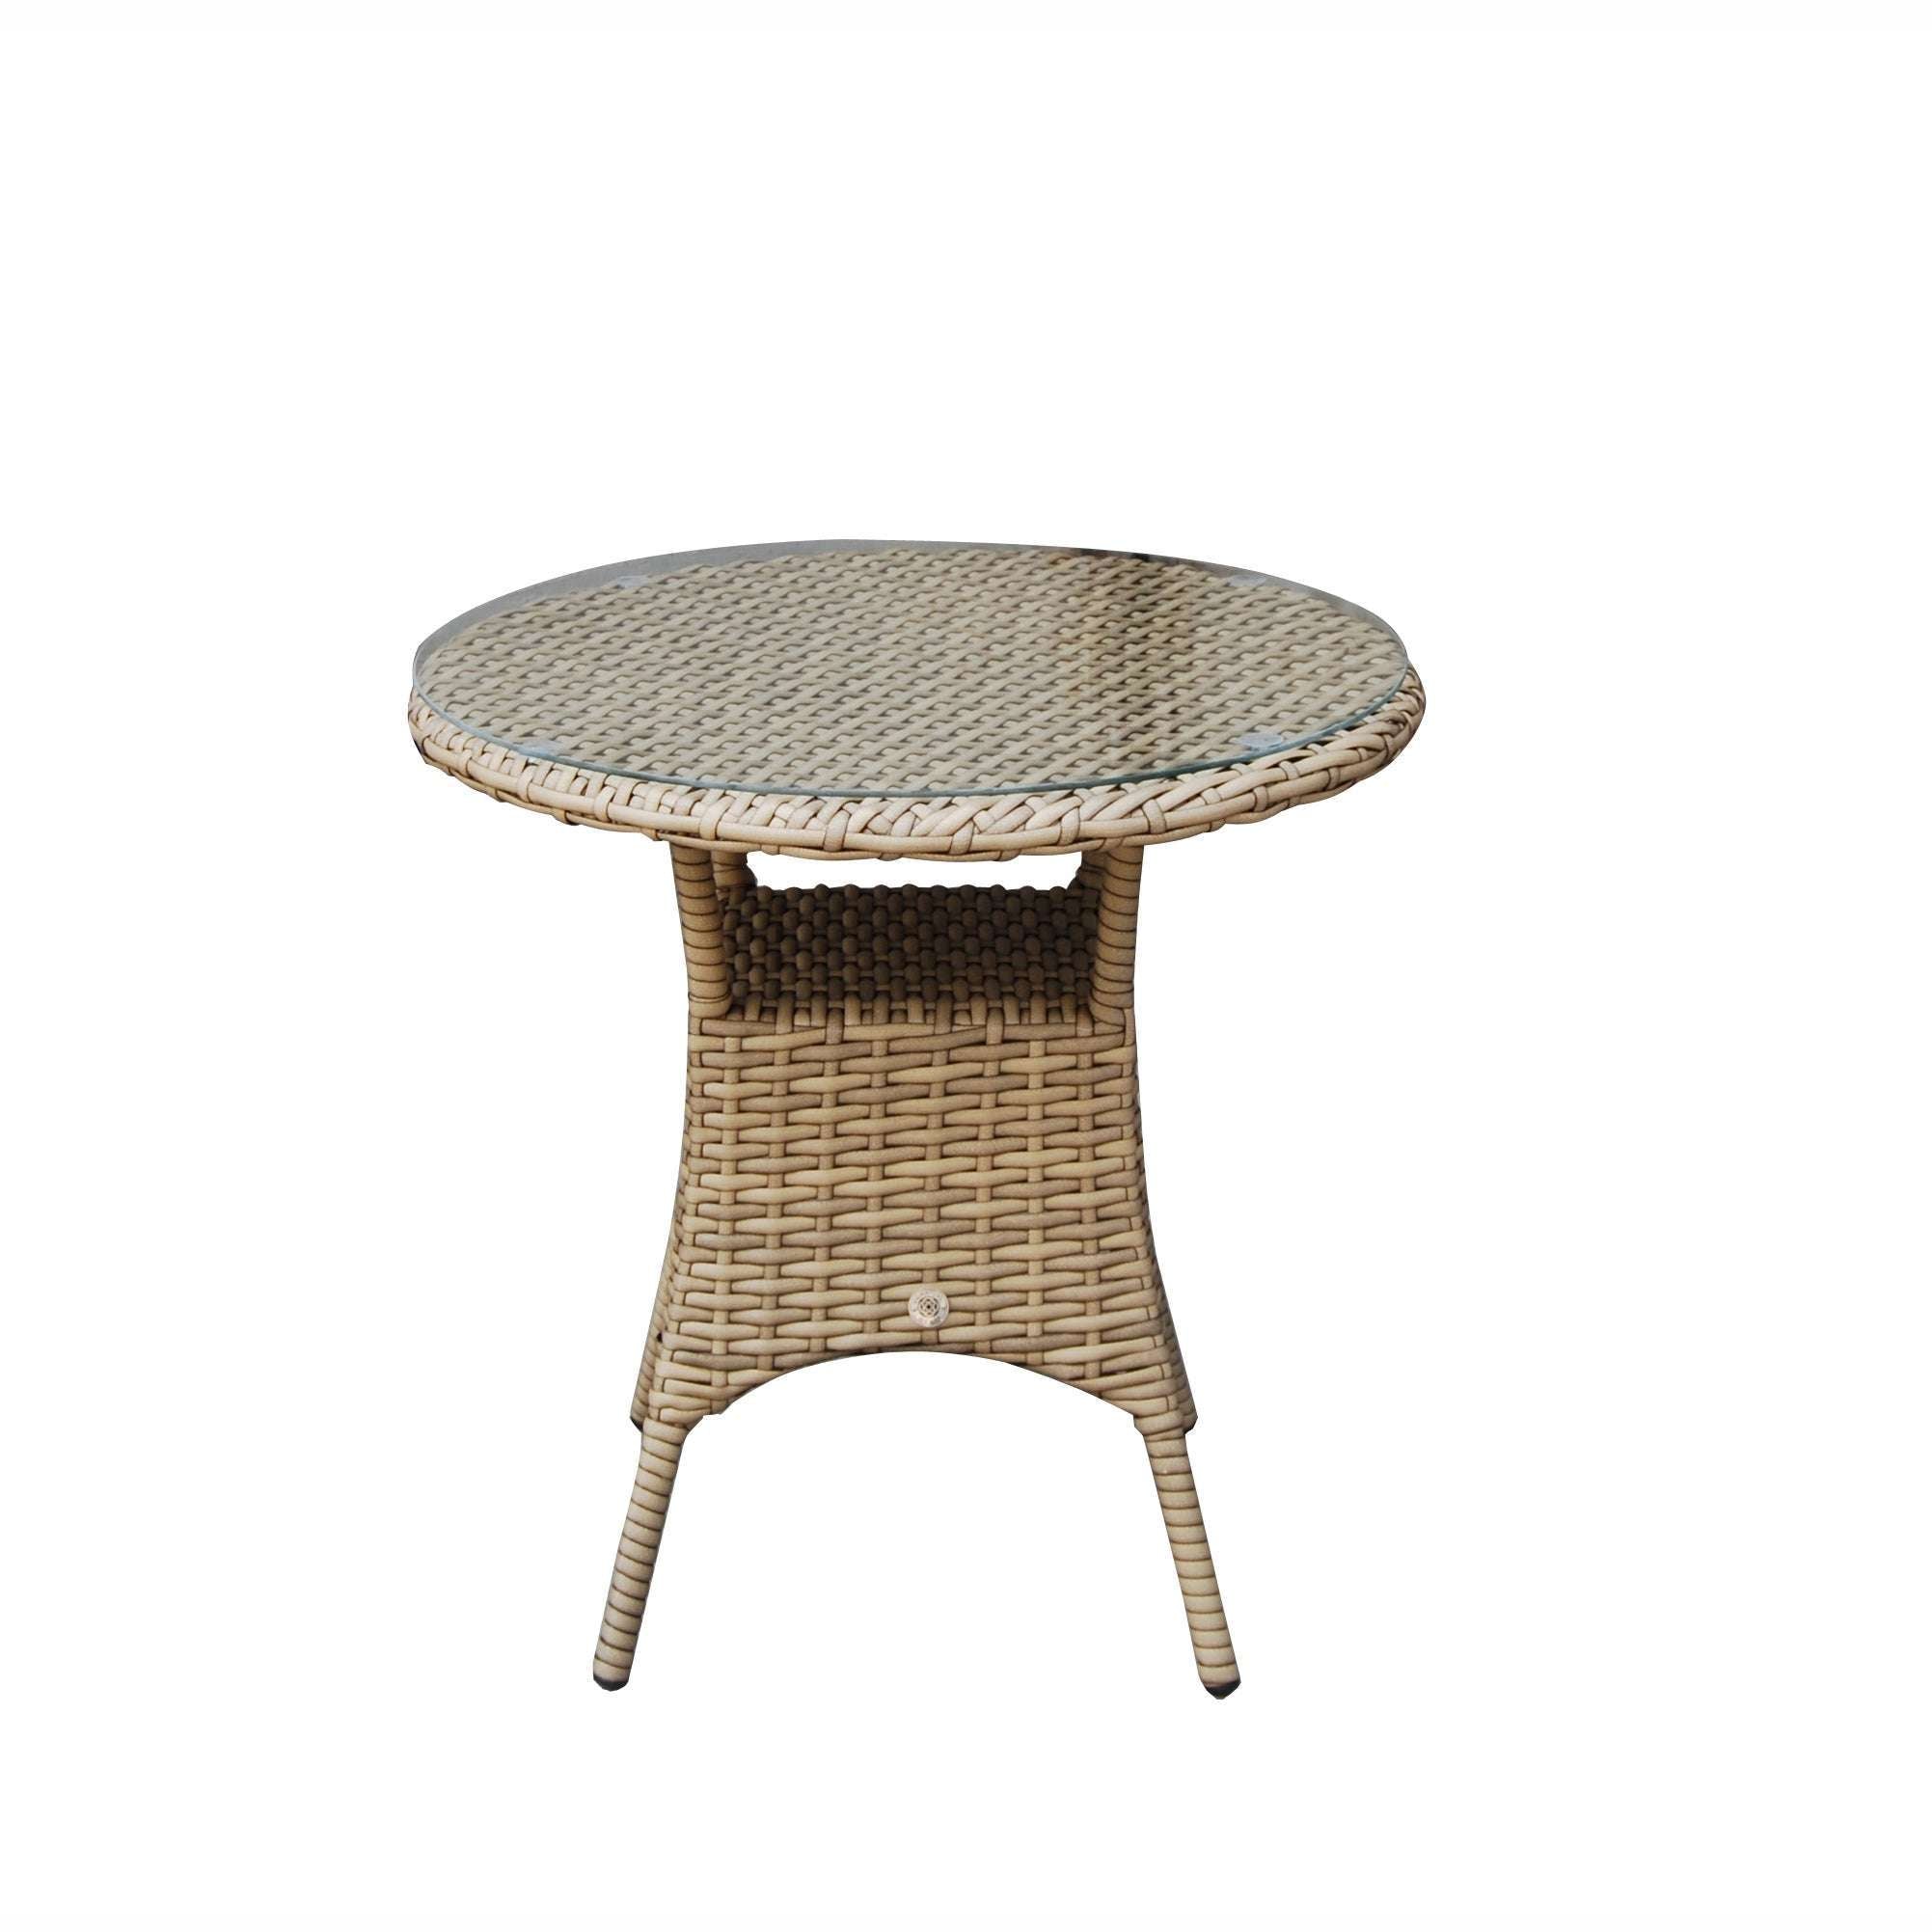 Exceptional Garden:Signature Weave Darcey Bistro Set with High Back Chairs